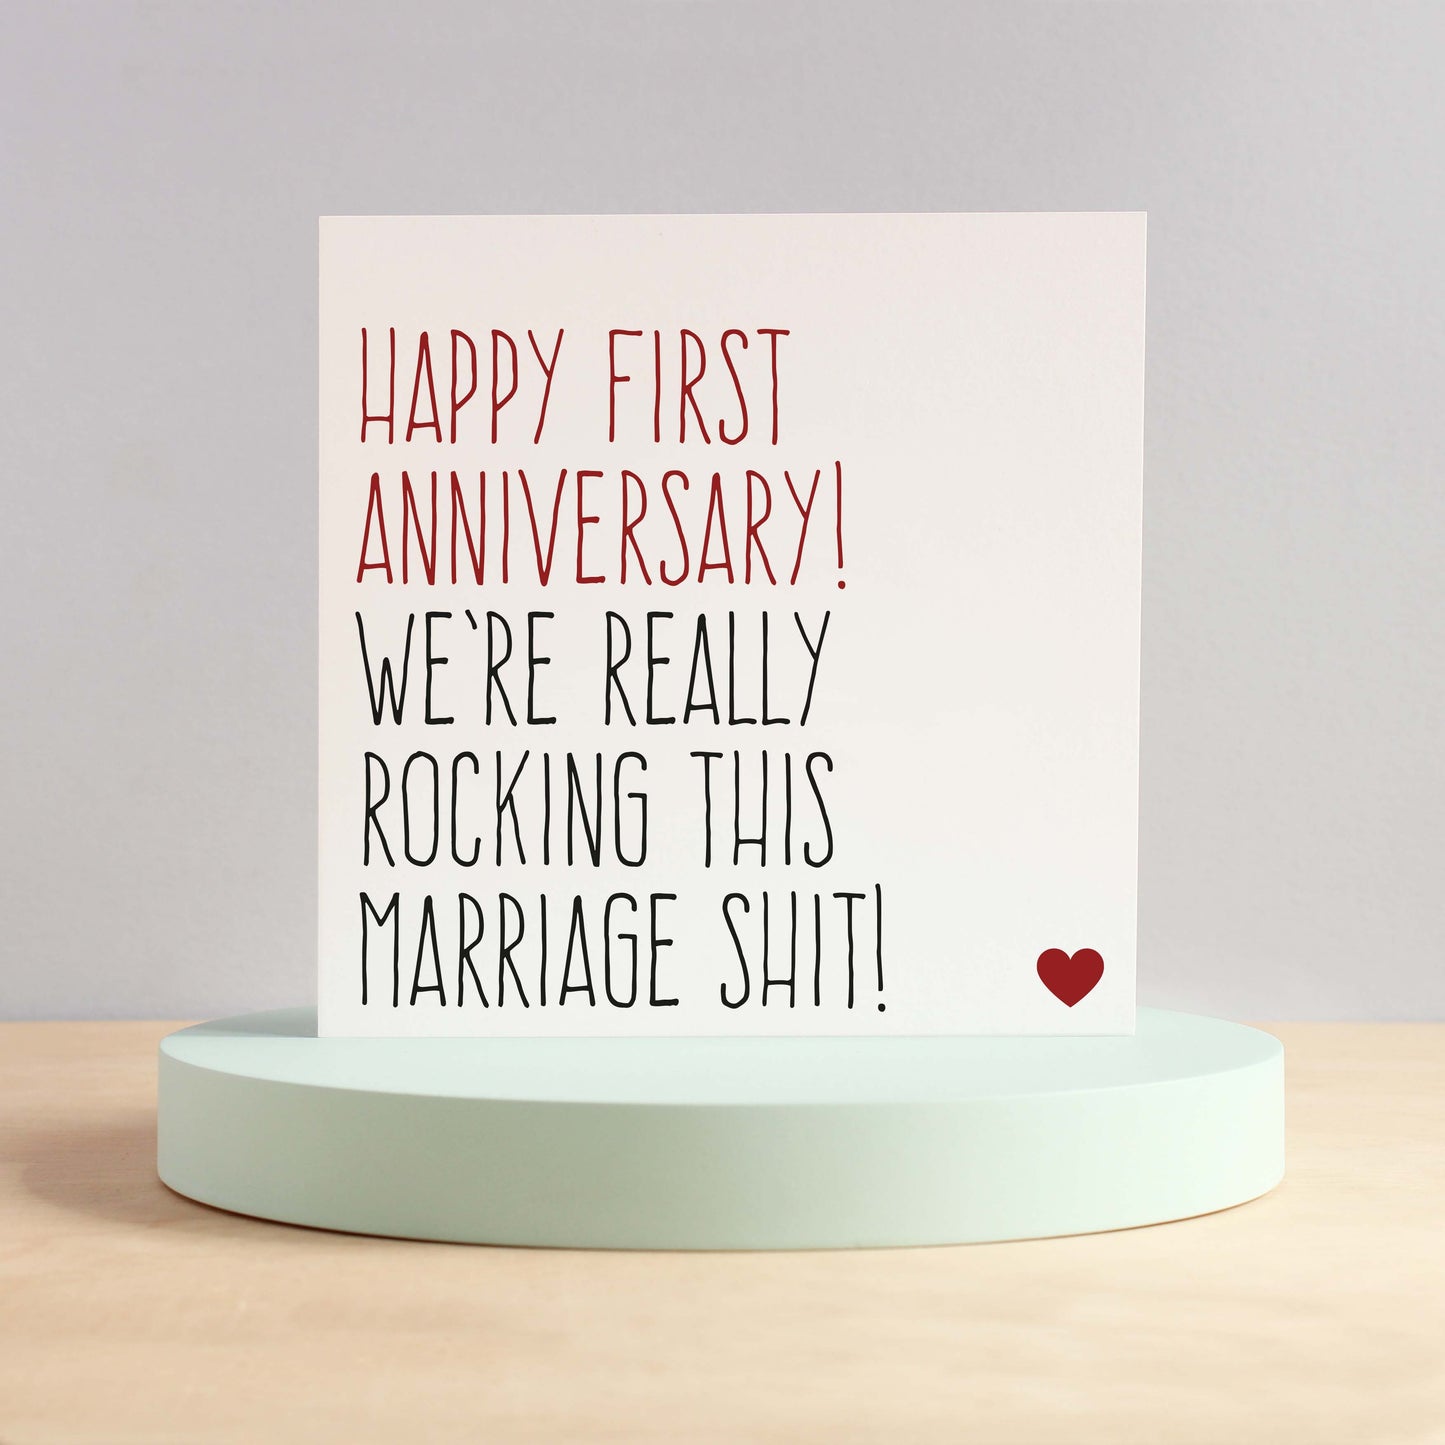 Rocking this marriage shit first anniversary card from Purple Tree Designs